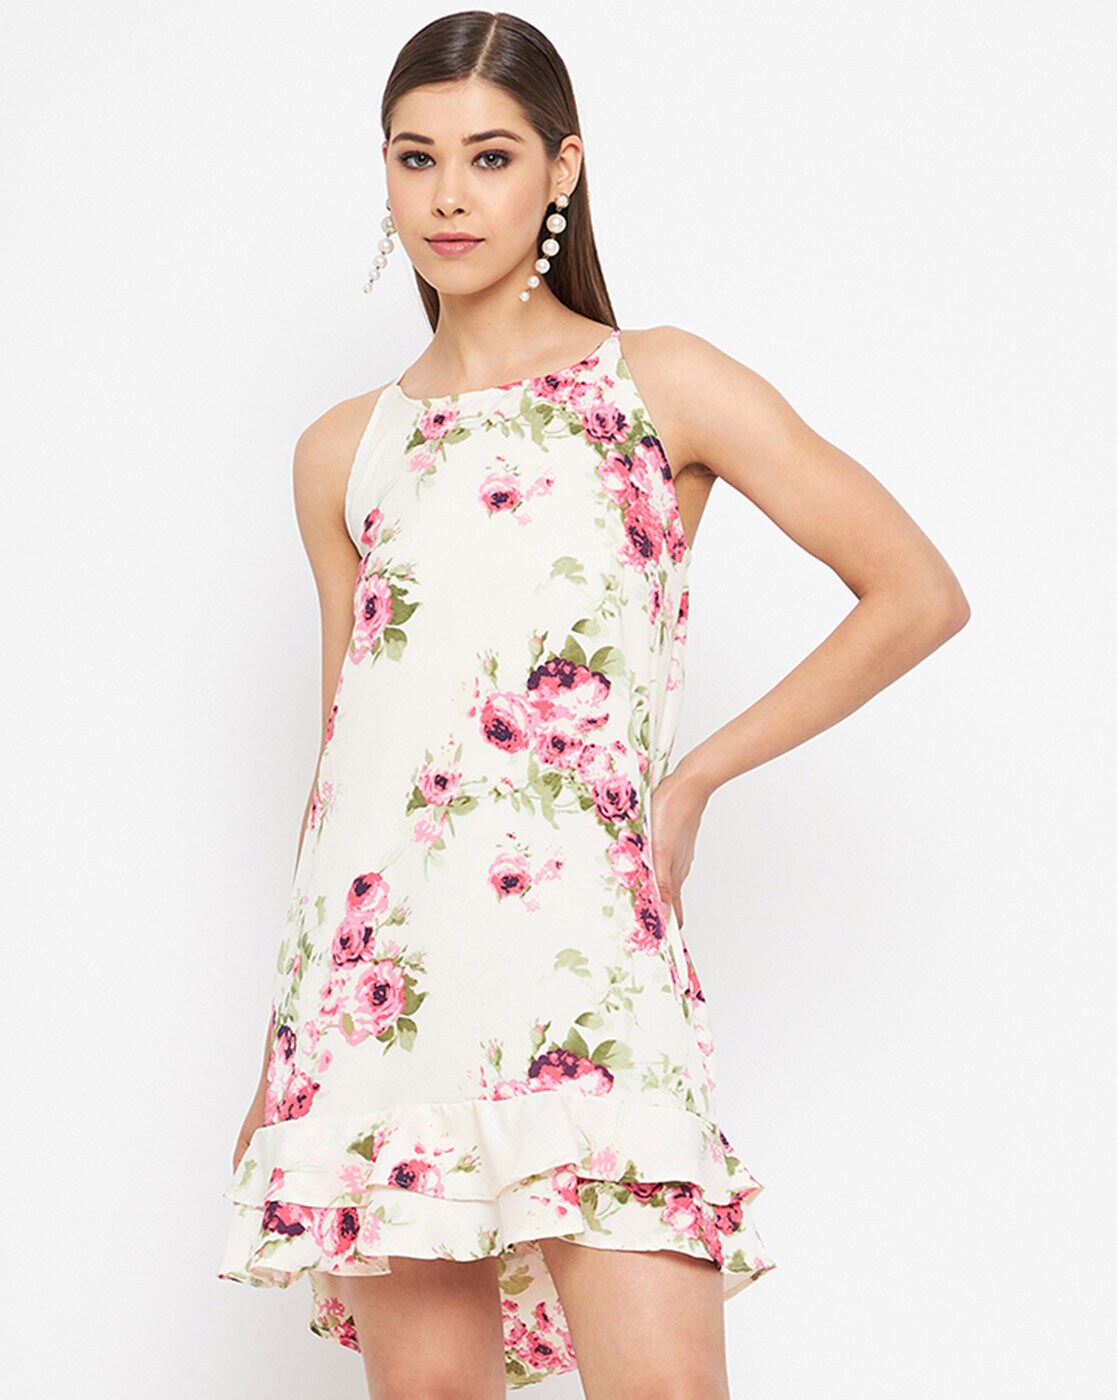 By Anthropologie Sleeveless Floral Slim Maxi Dress | Anthropologie Japan -  Women's Clothing, Accessories & Home